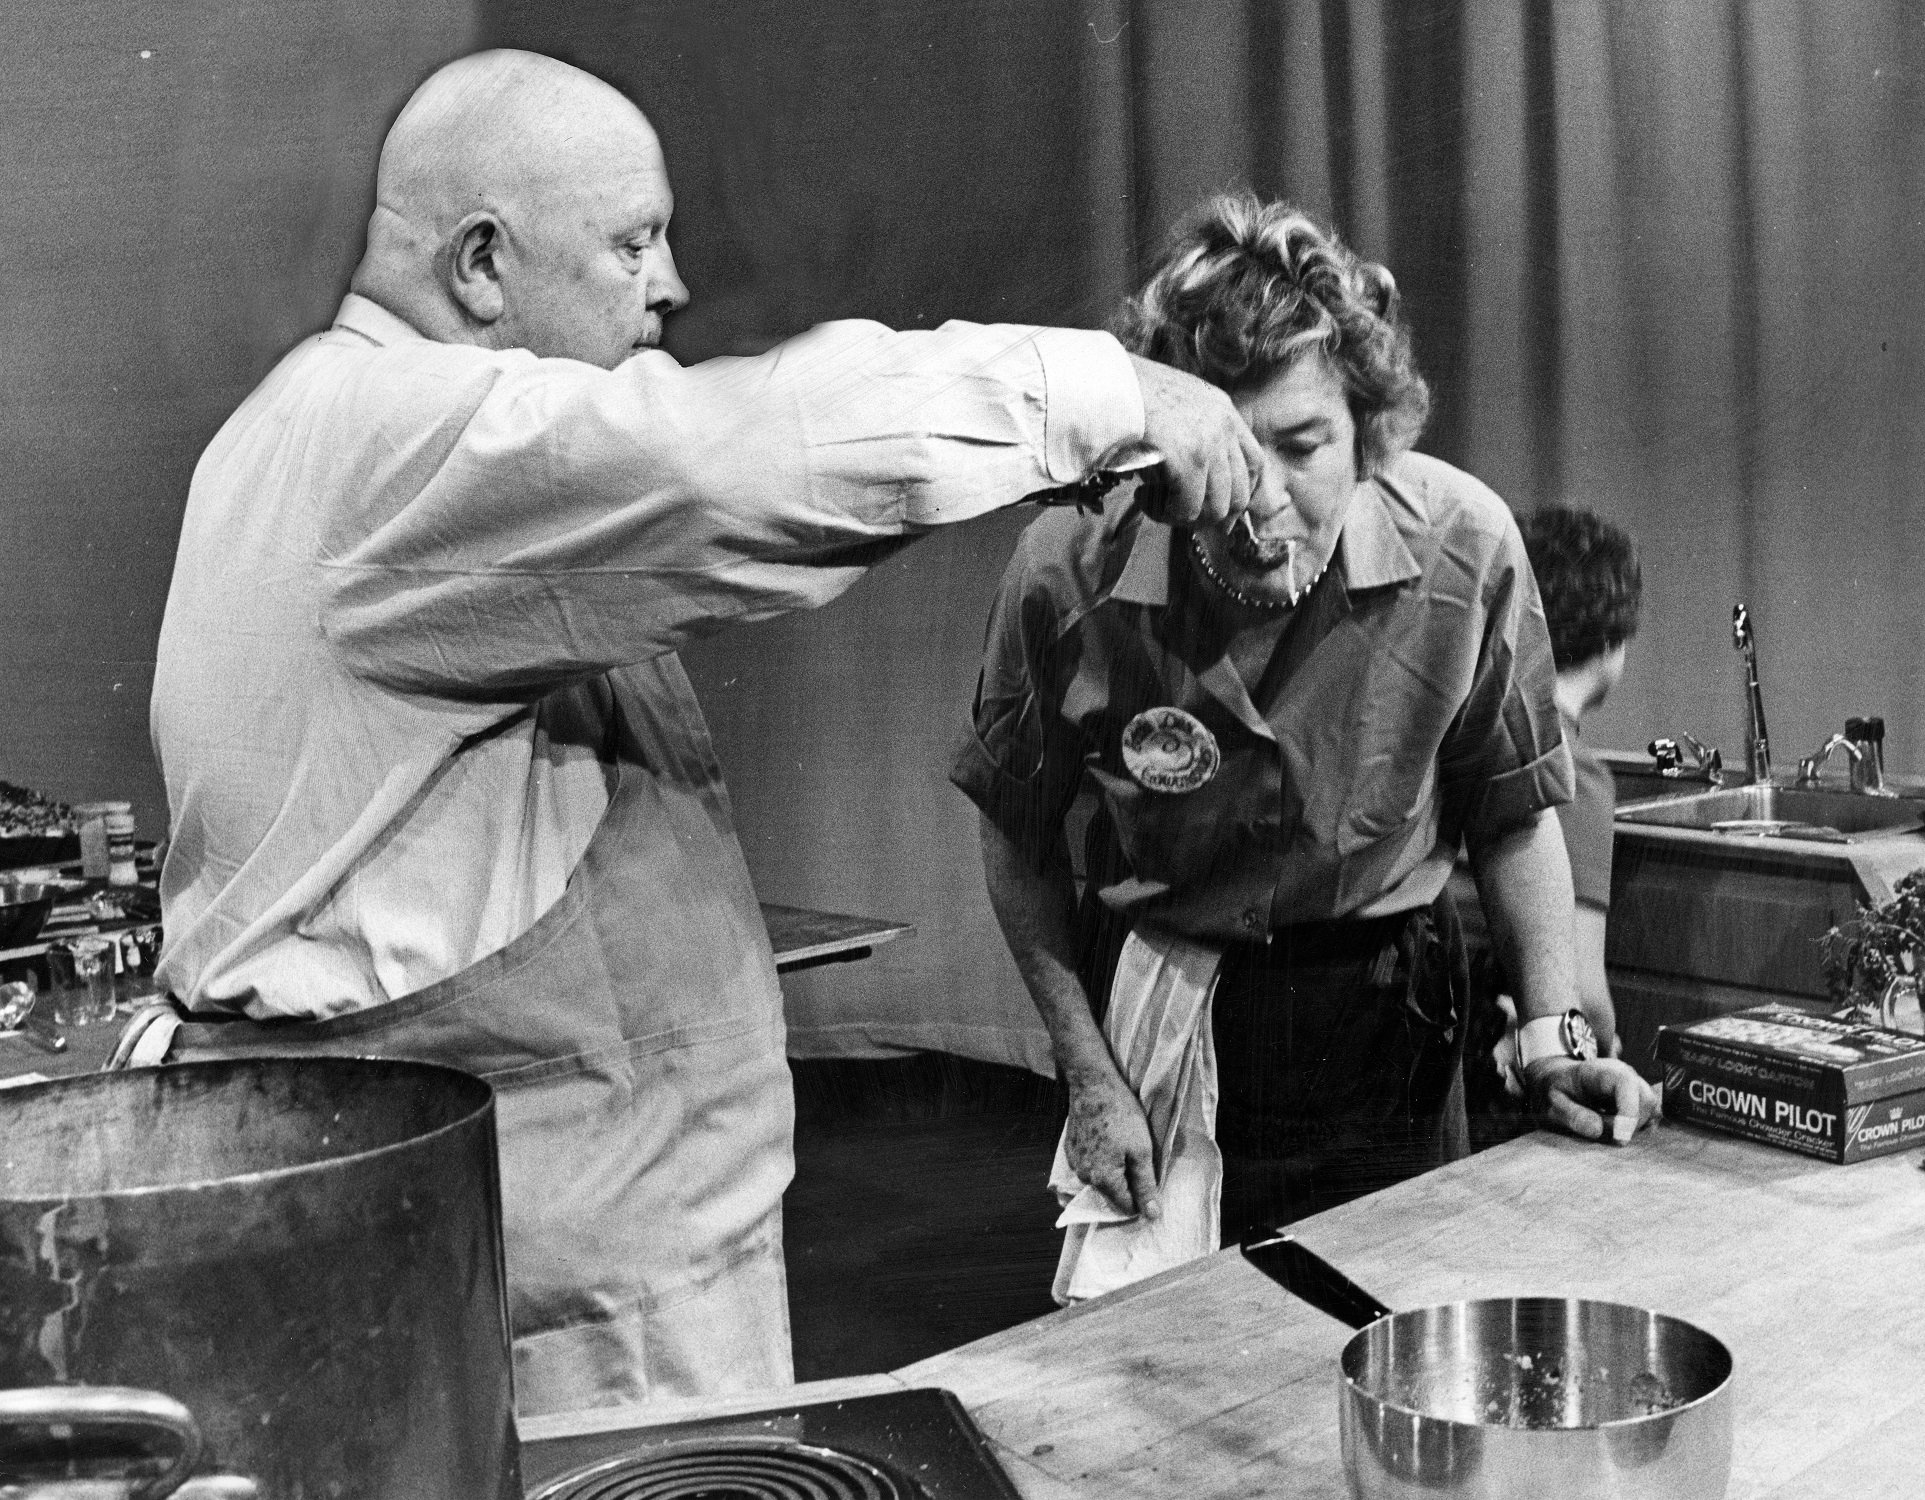 James Beard feeds Julia Child during the 1968 Fish Expo at the WGBH-TV studio in Boston